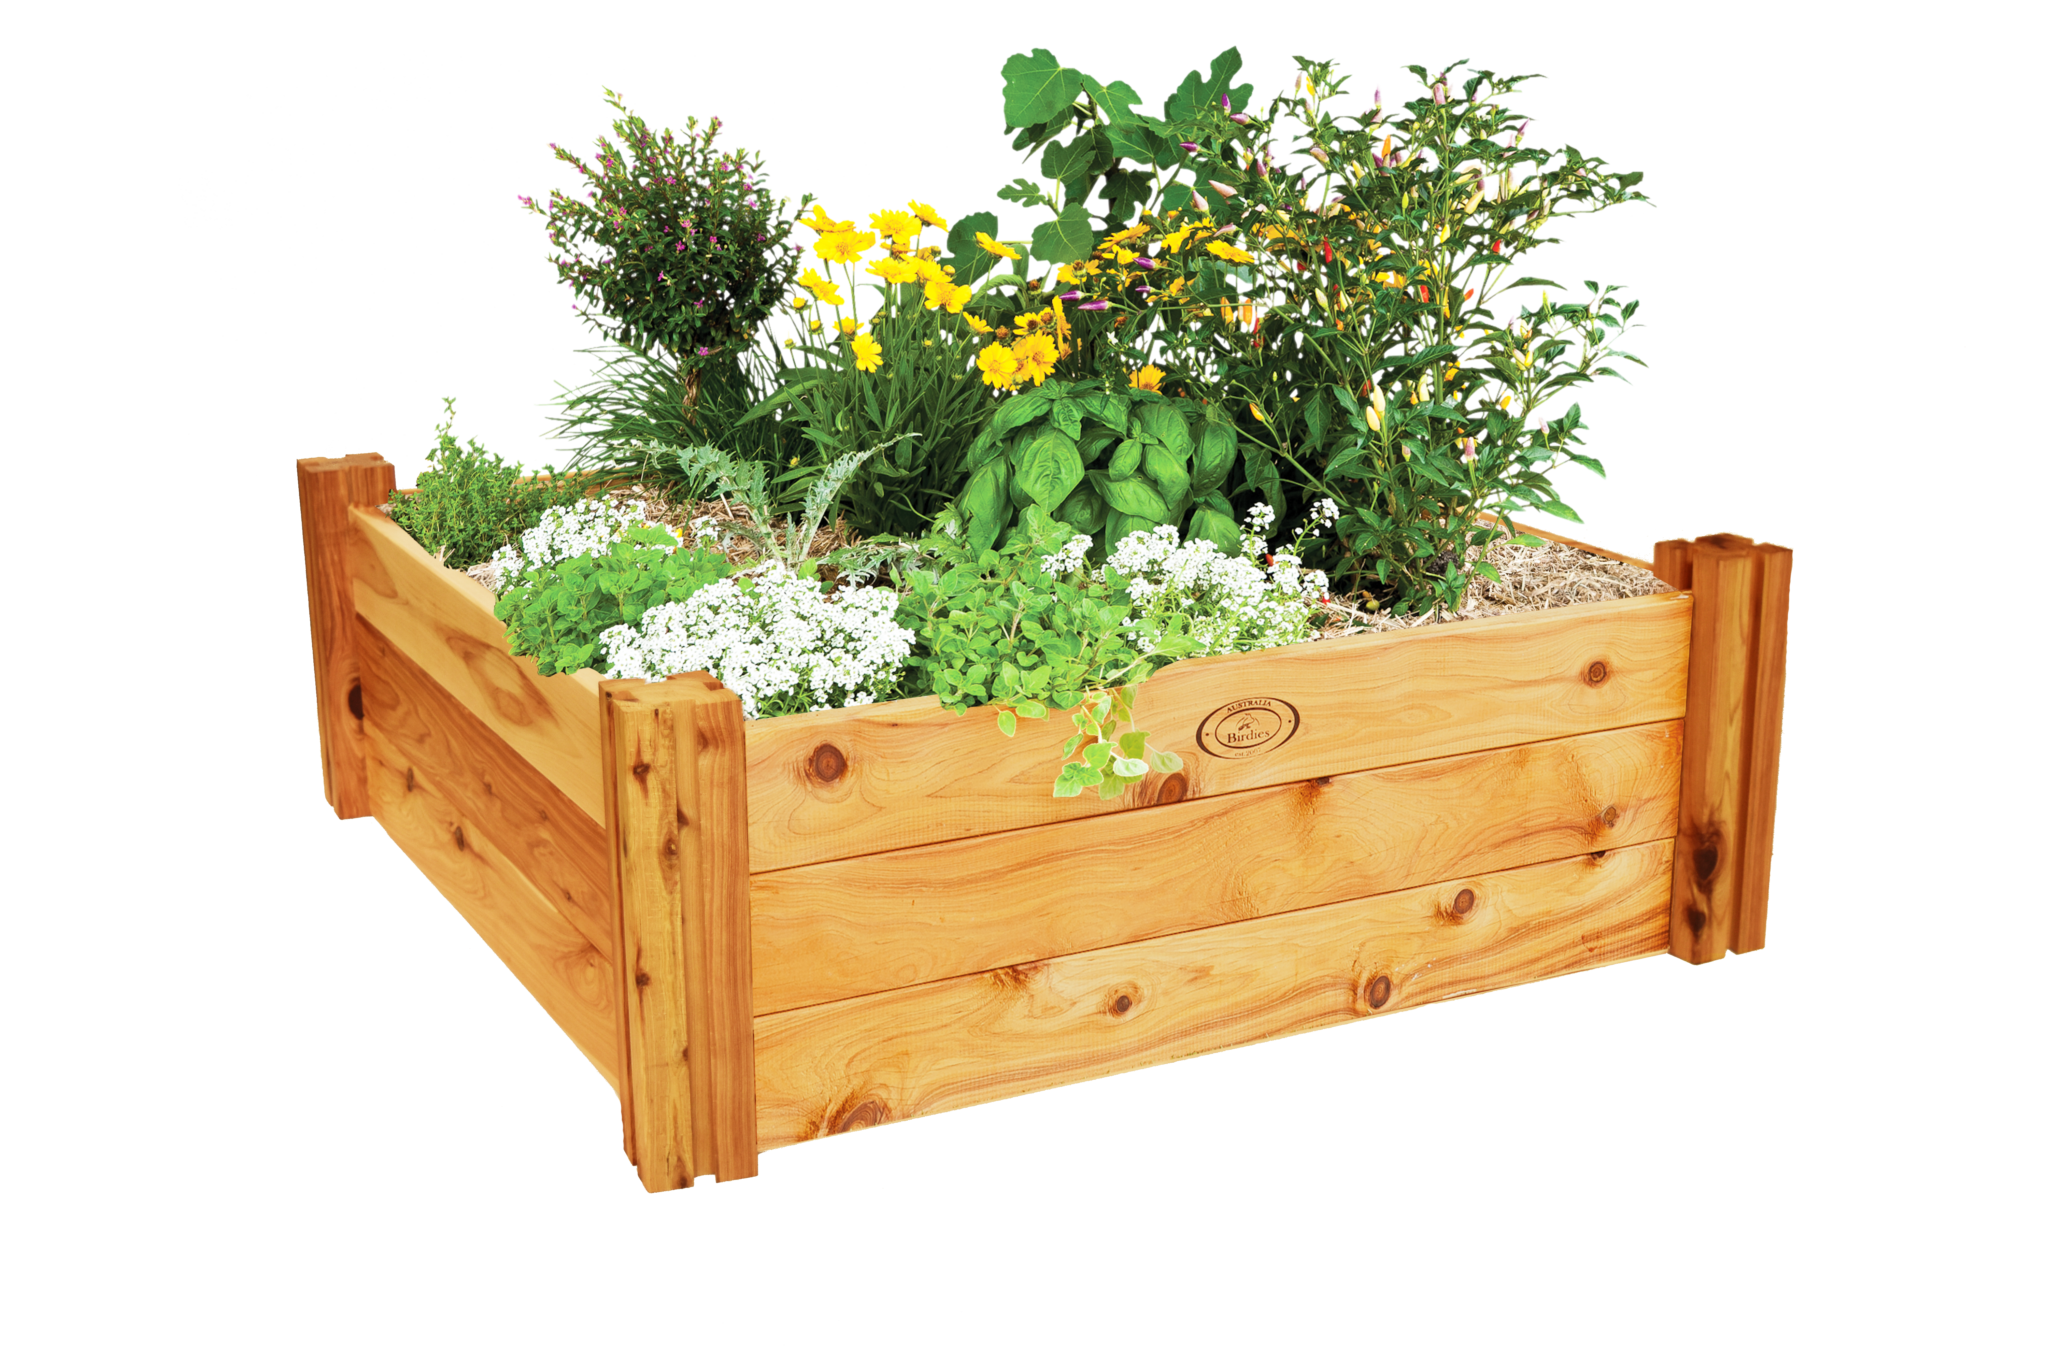 clipart bed wood bed